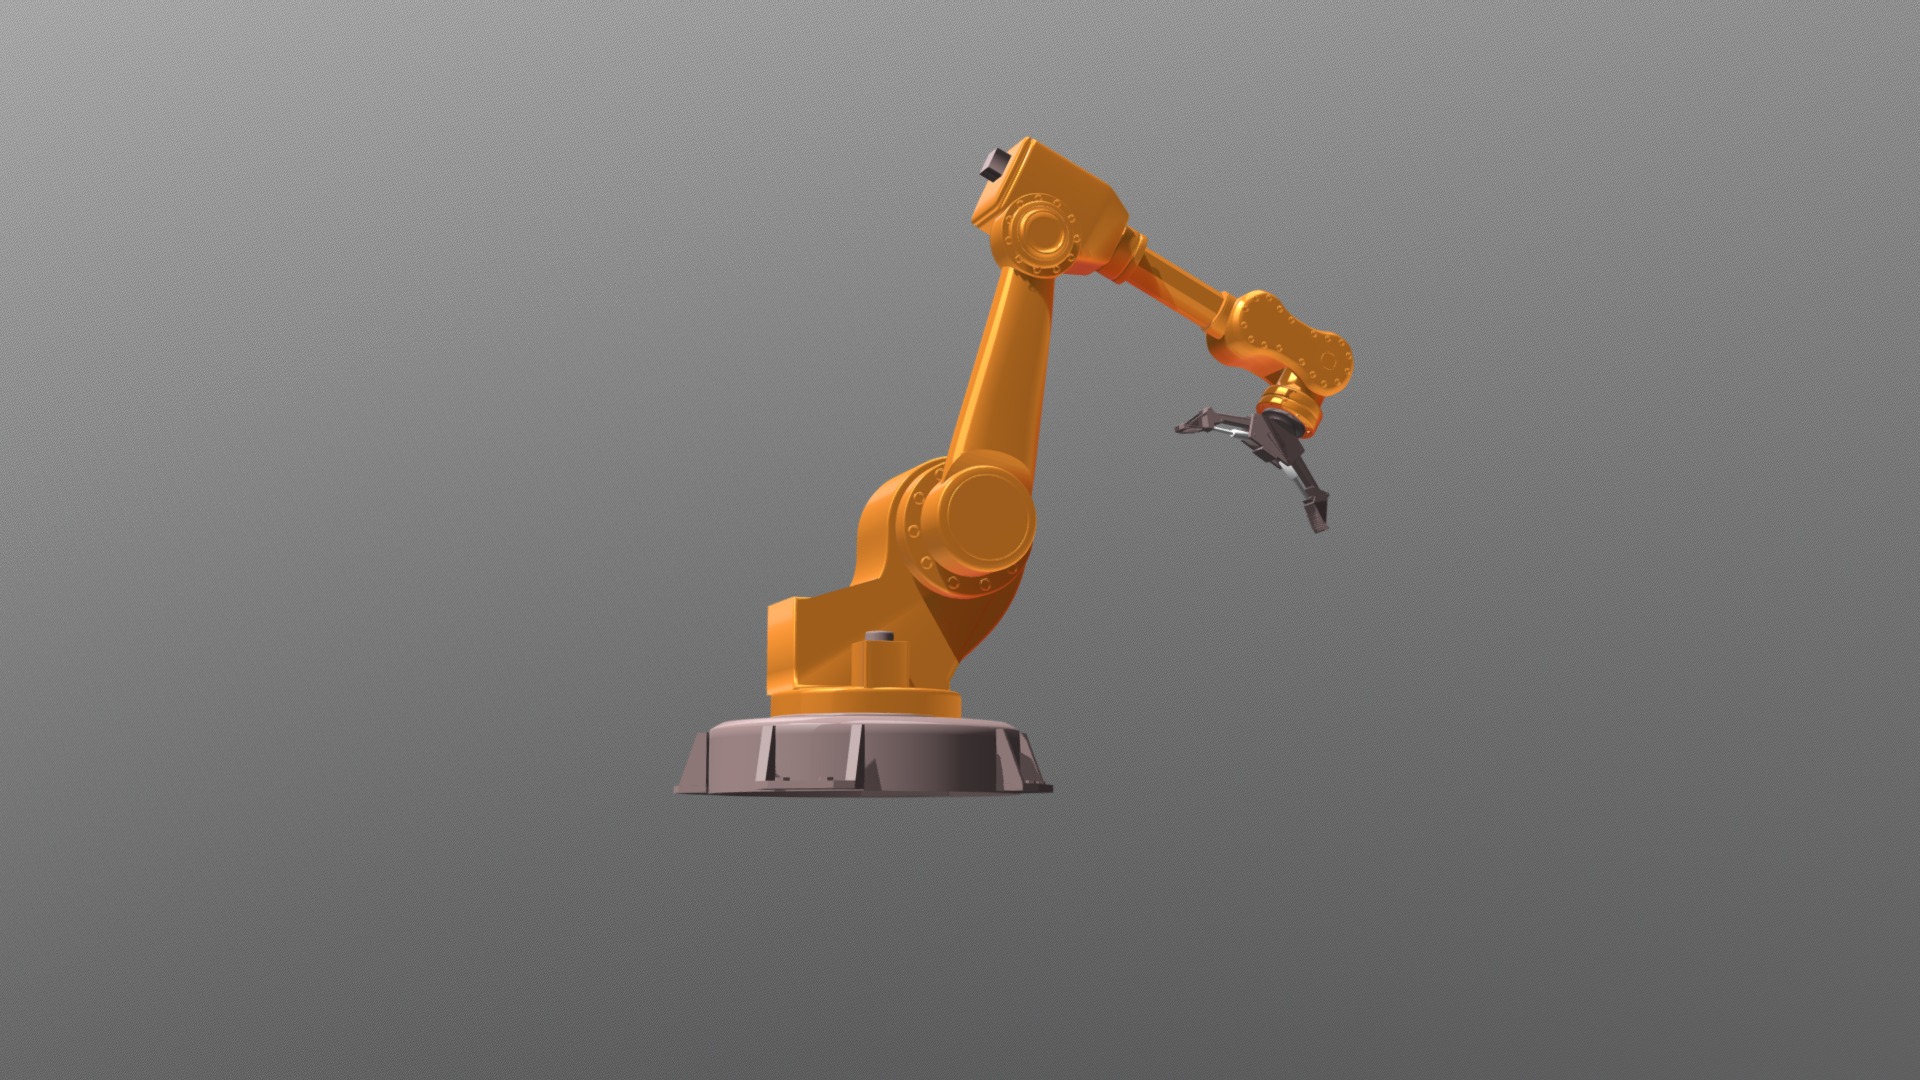 3D model Robotic Arm - This is a 3D model of the Robotic Arm. The 3D model is about a yellow and orange robot.